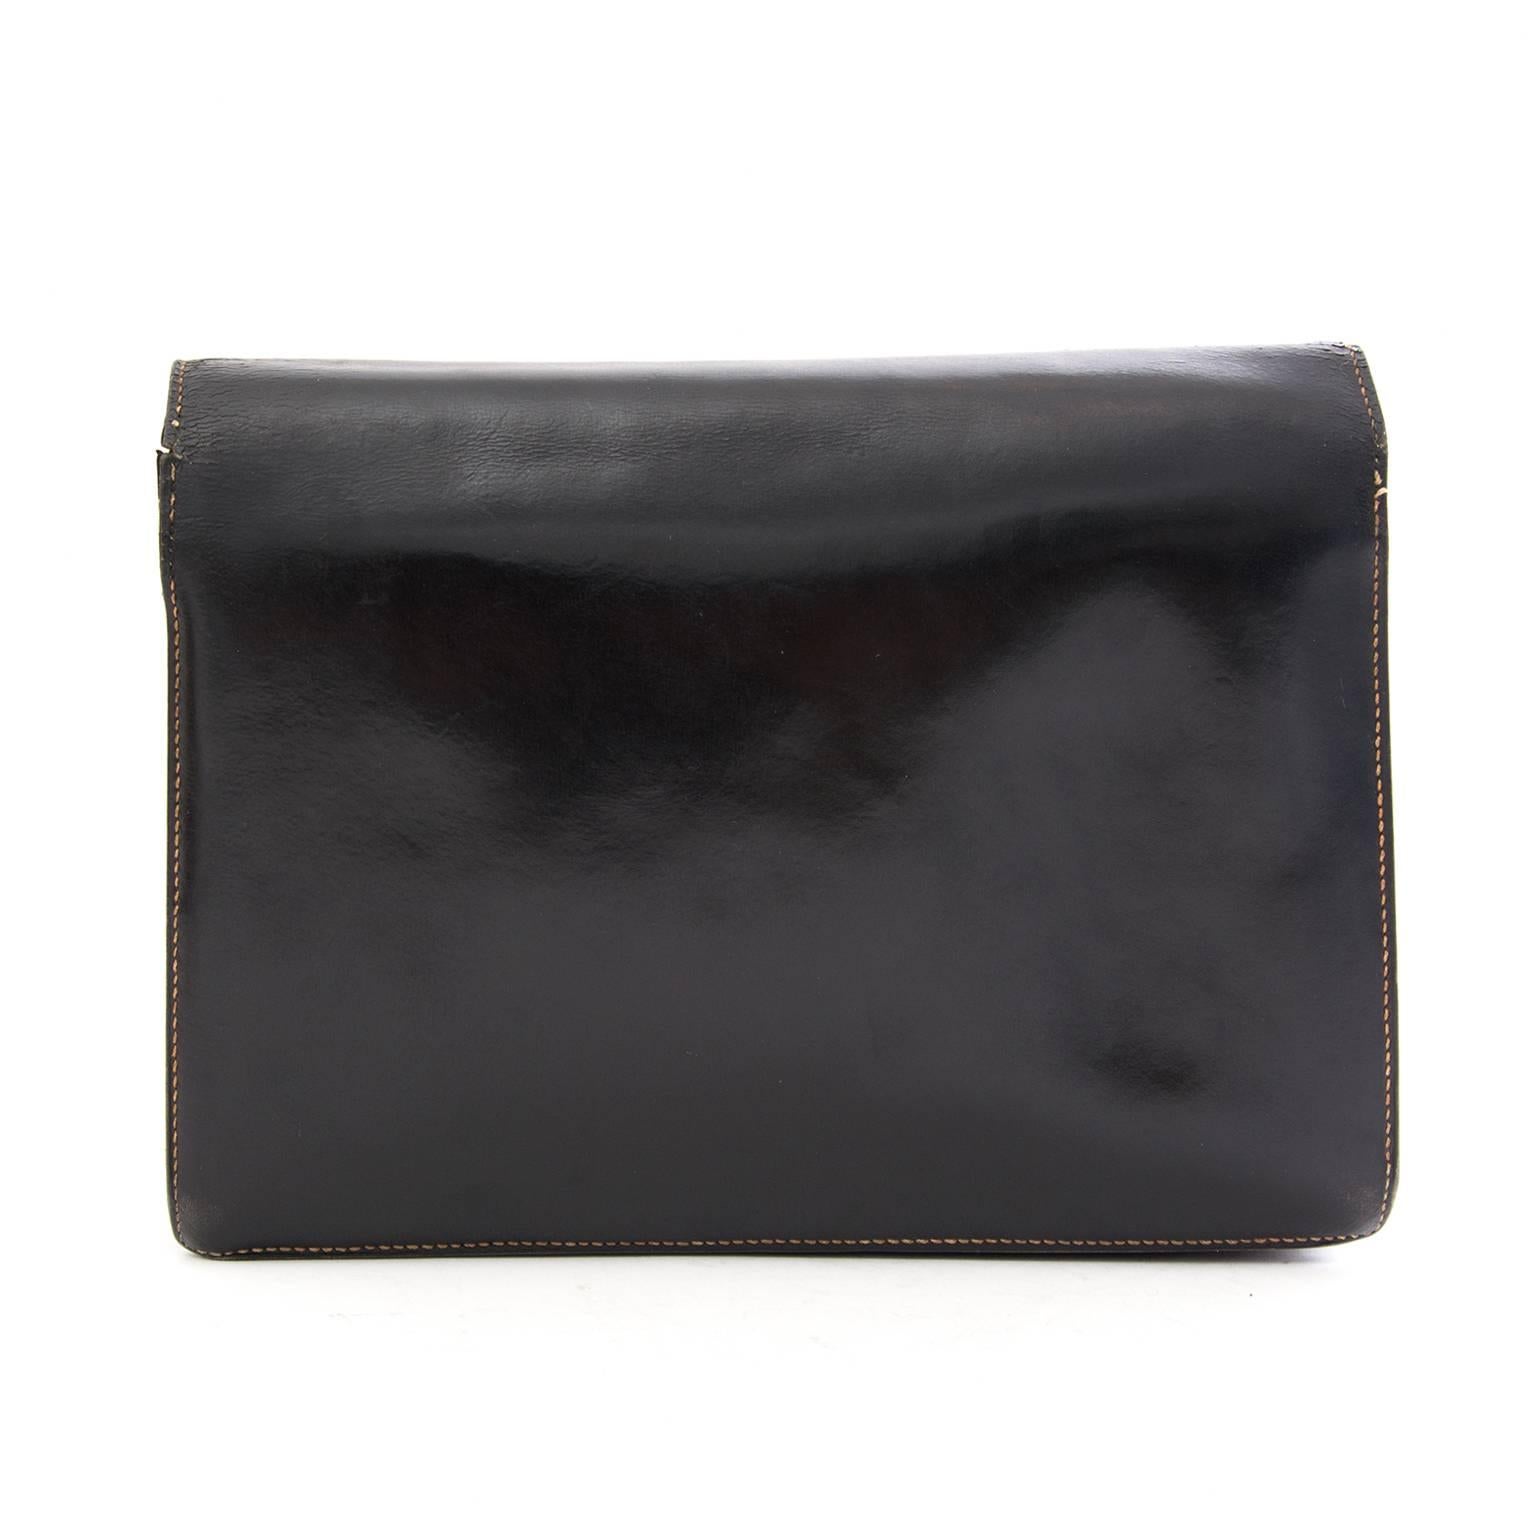 Black Hermès 'Faco' clutch bag

This Hermès 'Faco' clutch comes in black leather, making it the perfect bag for any occasion.

Contains three smaller pockets on the inside. There are some signs of use and little scratches as shown in pictures.